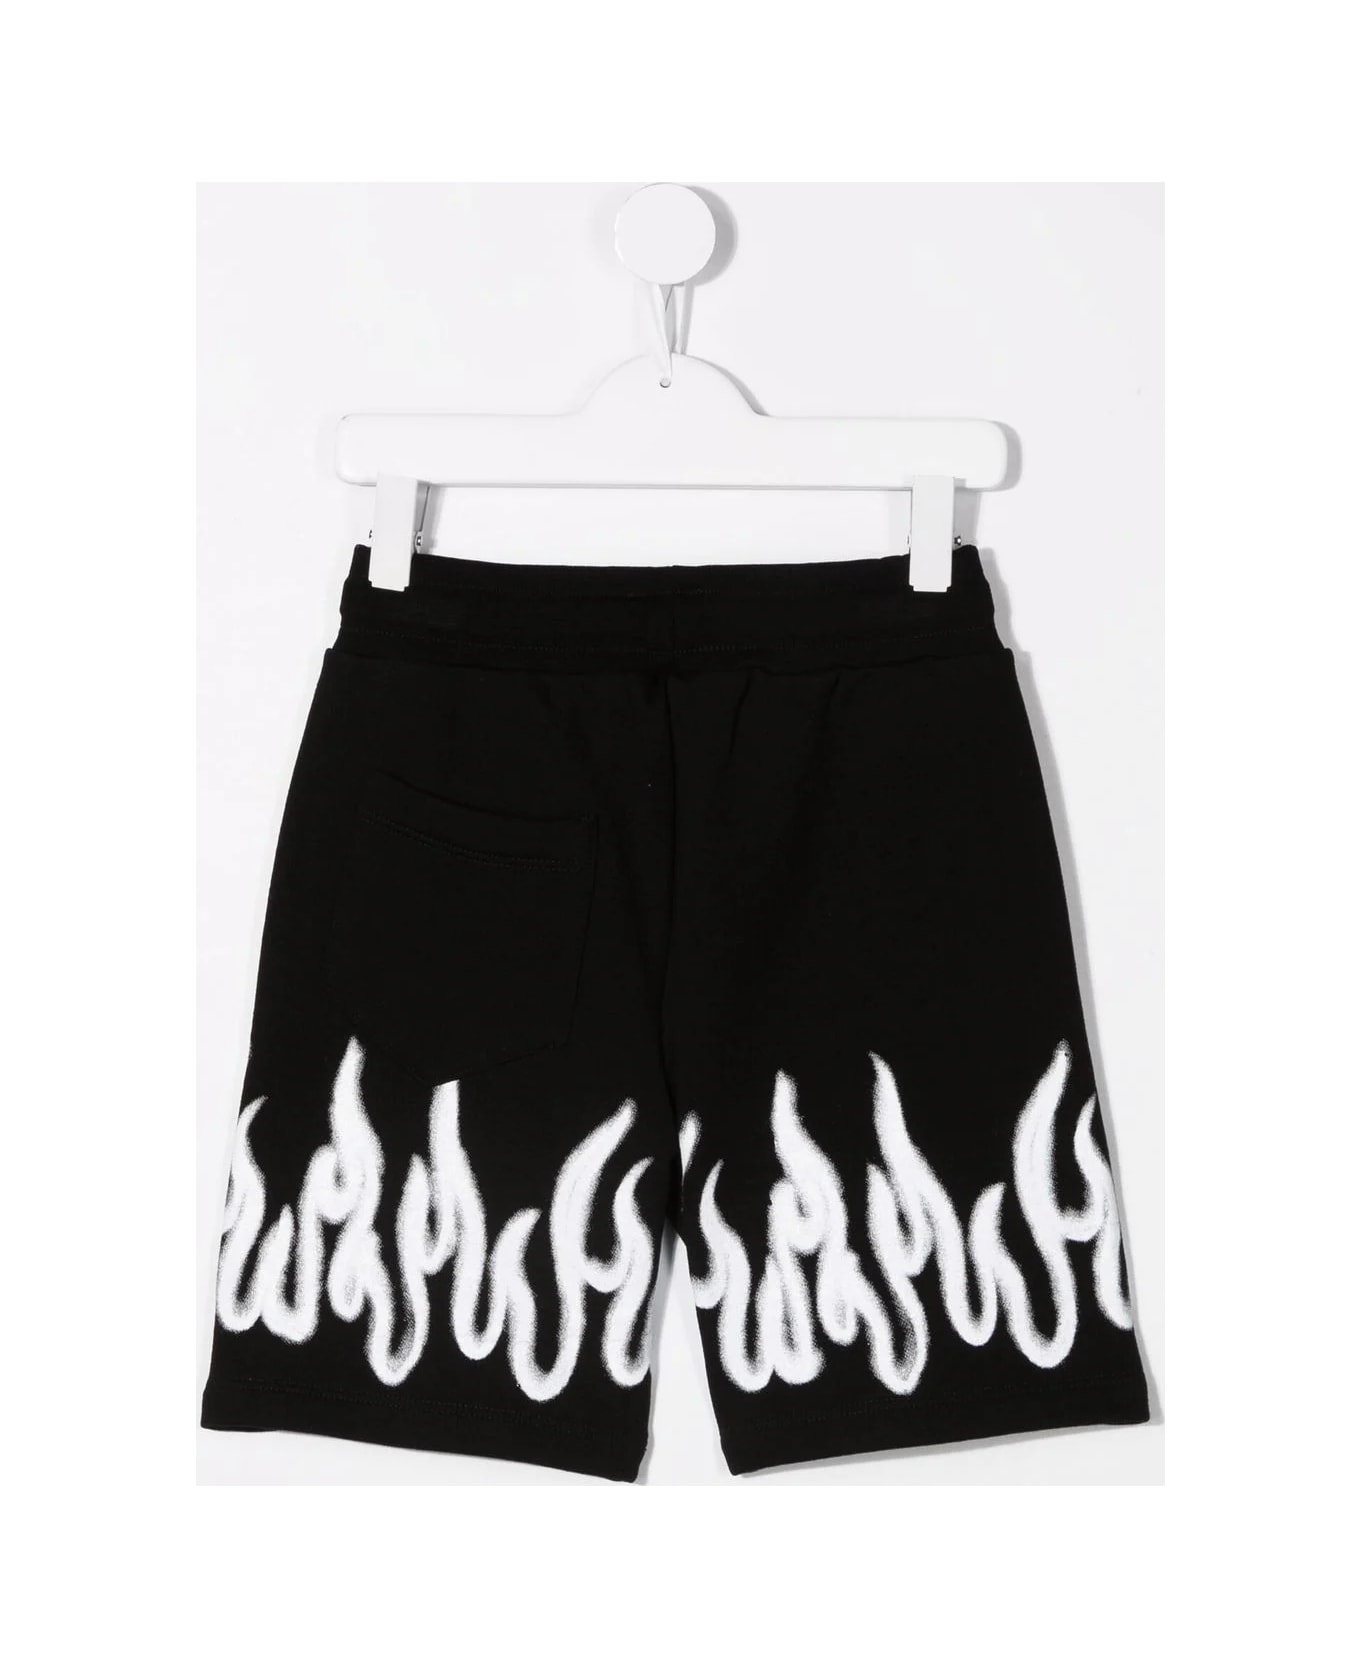 Vision of Super Kids Black Sports Shorts With White Spray Flames Print - Black